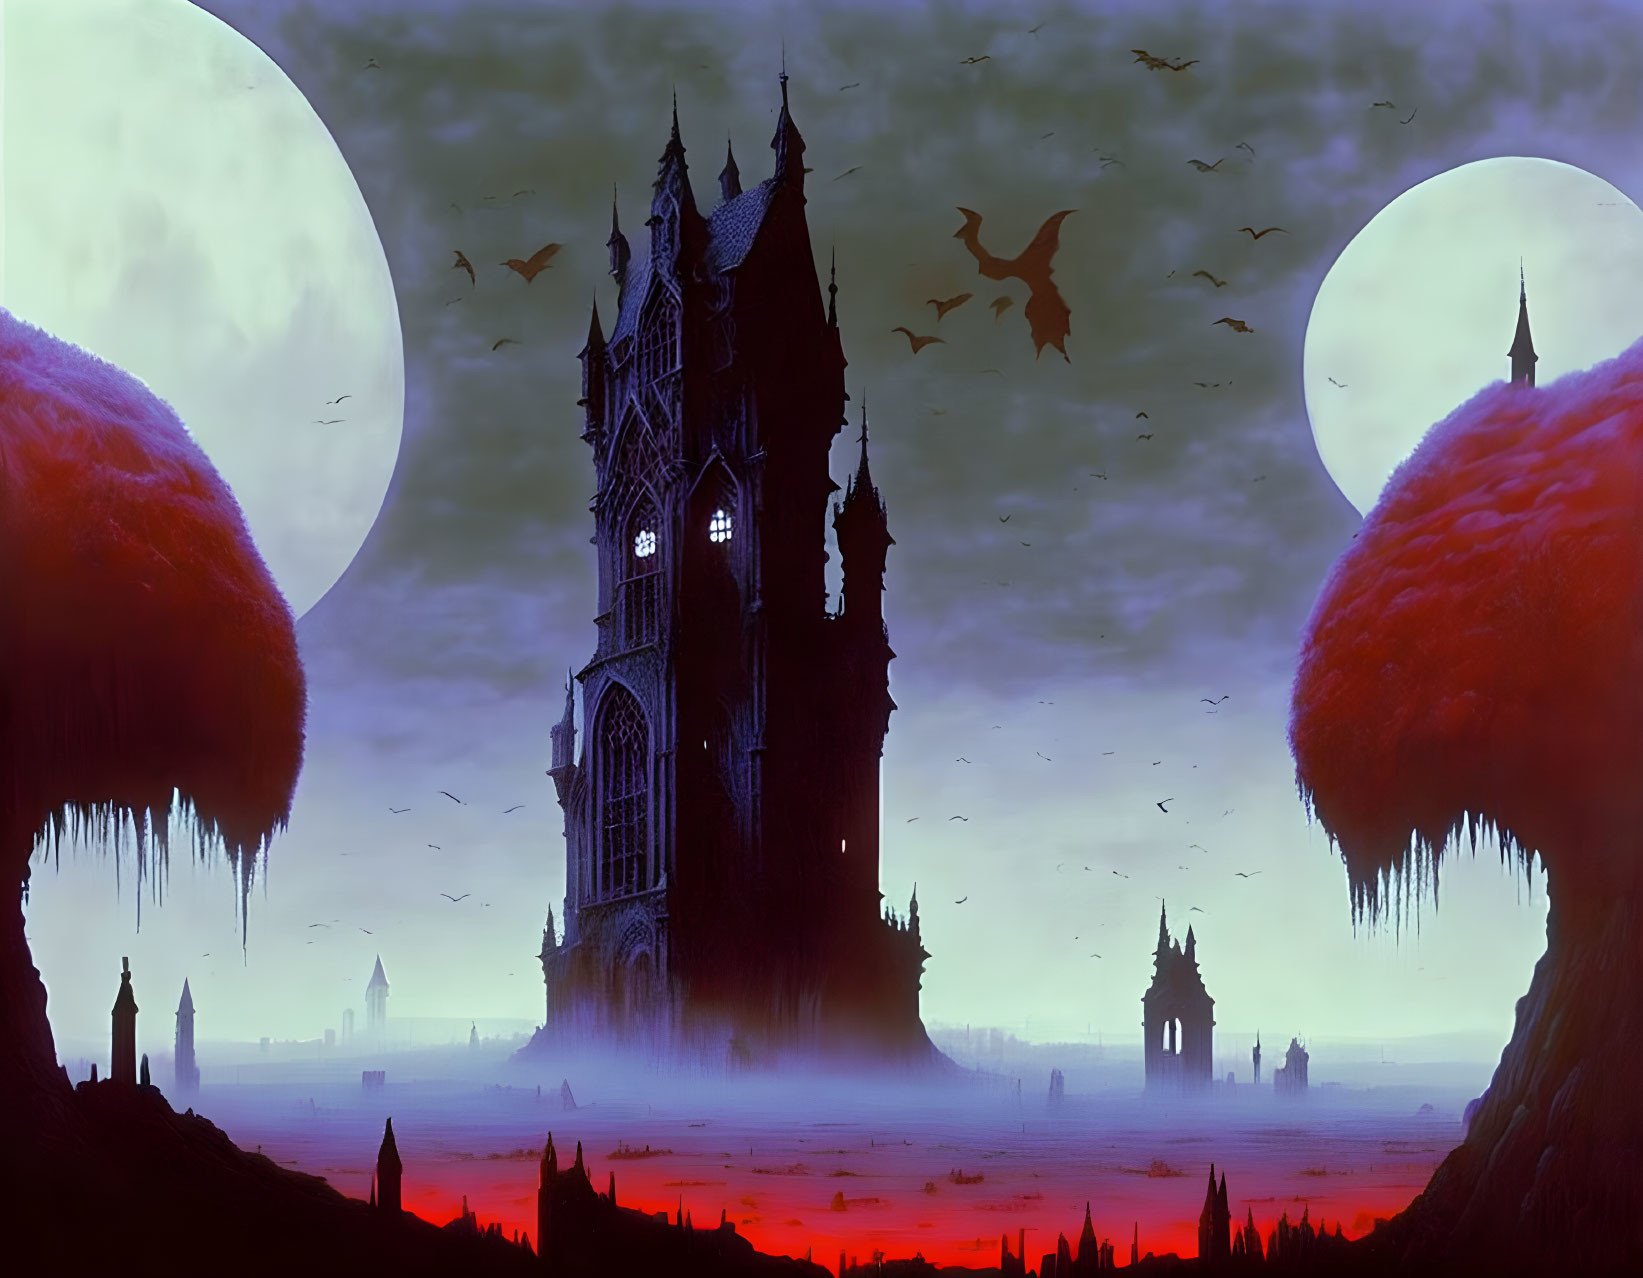 Gothic castle in crimson landscape with twin moons and flying creatures